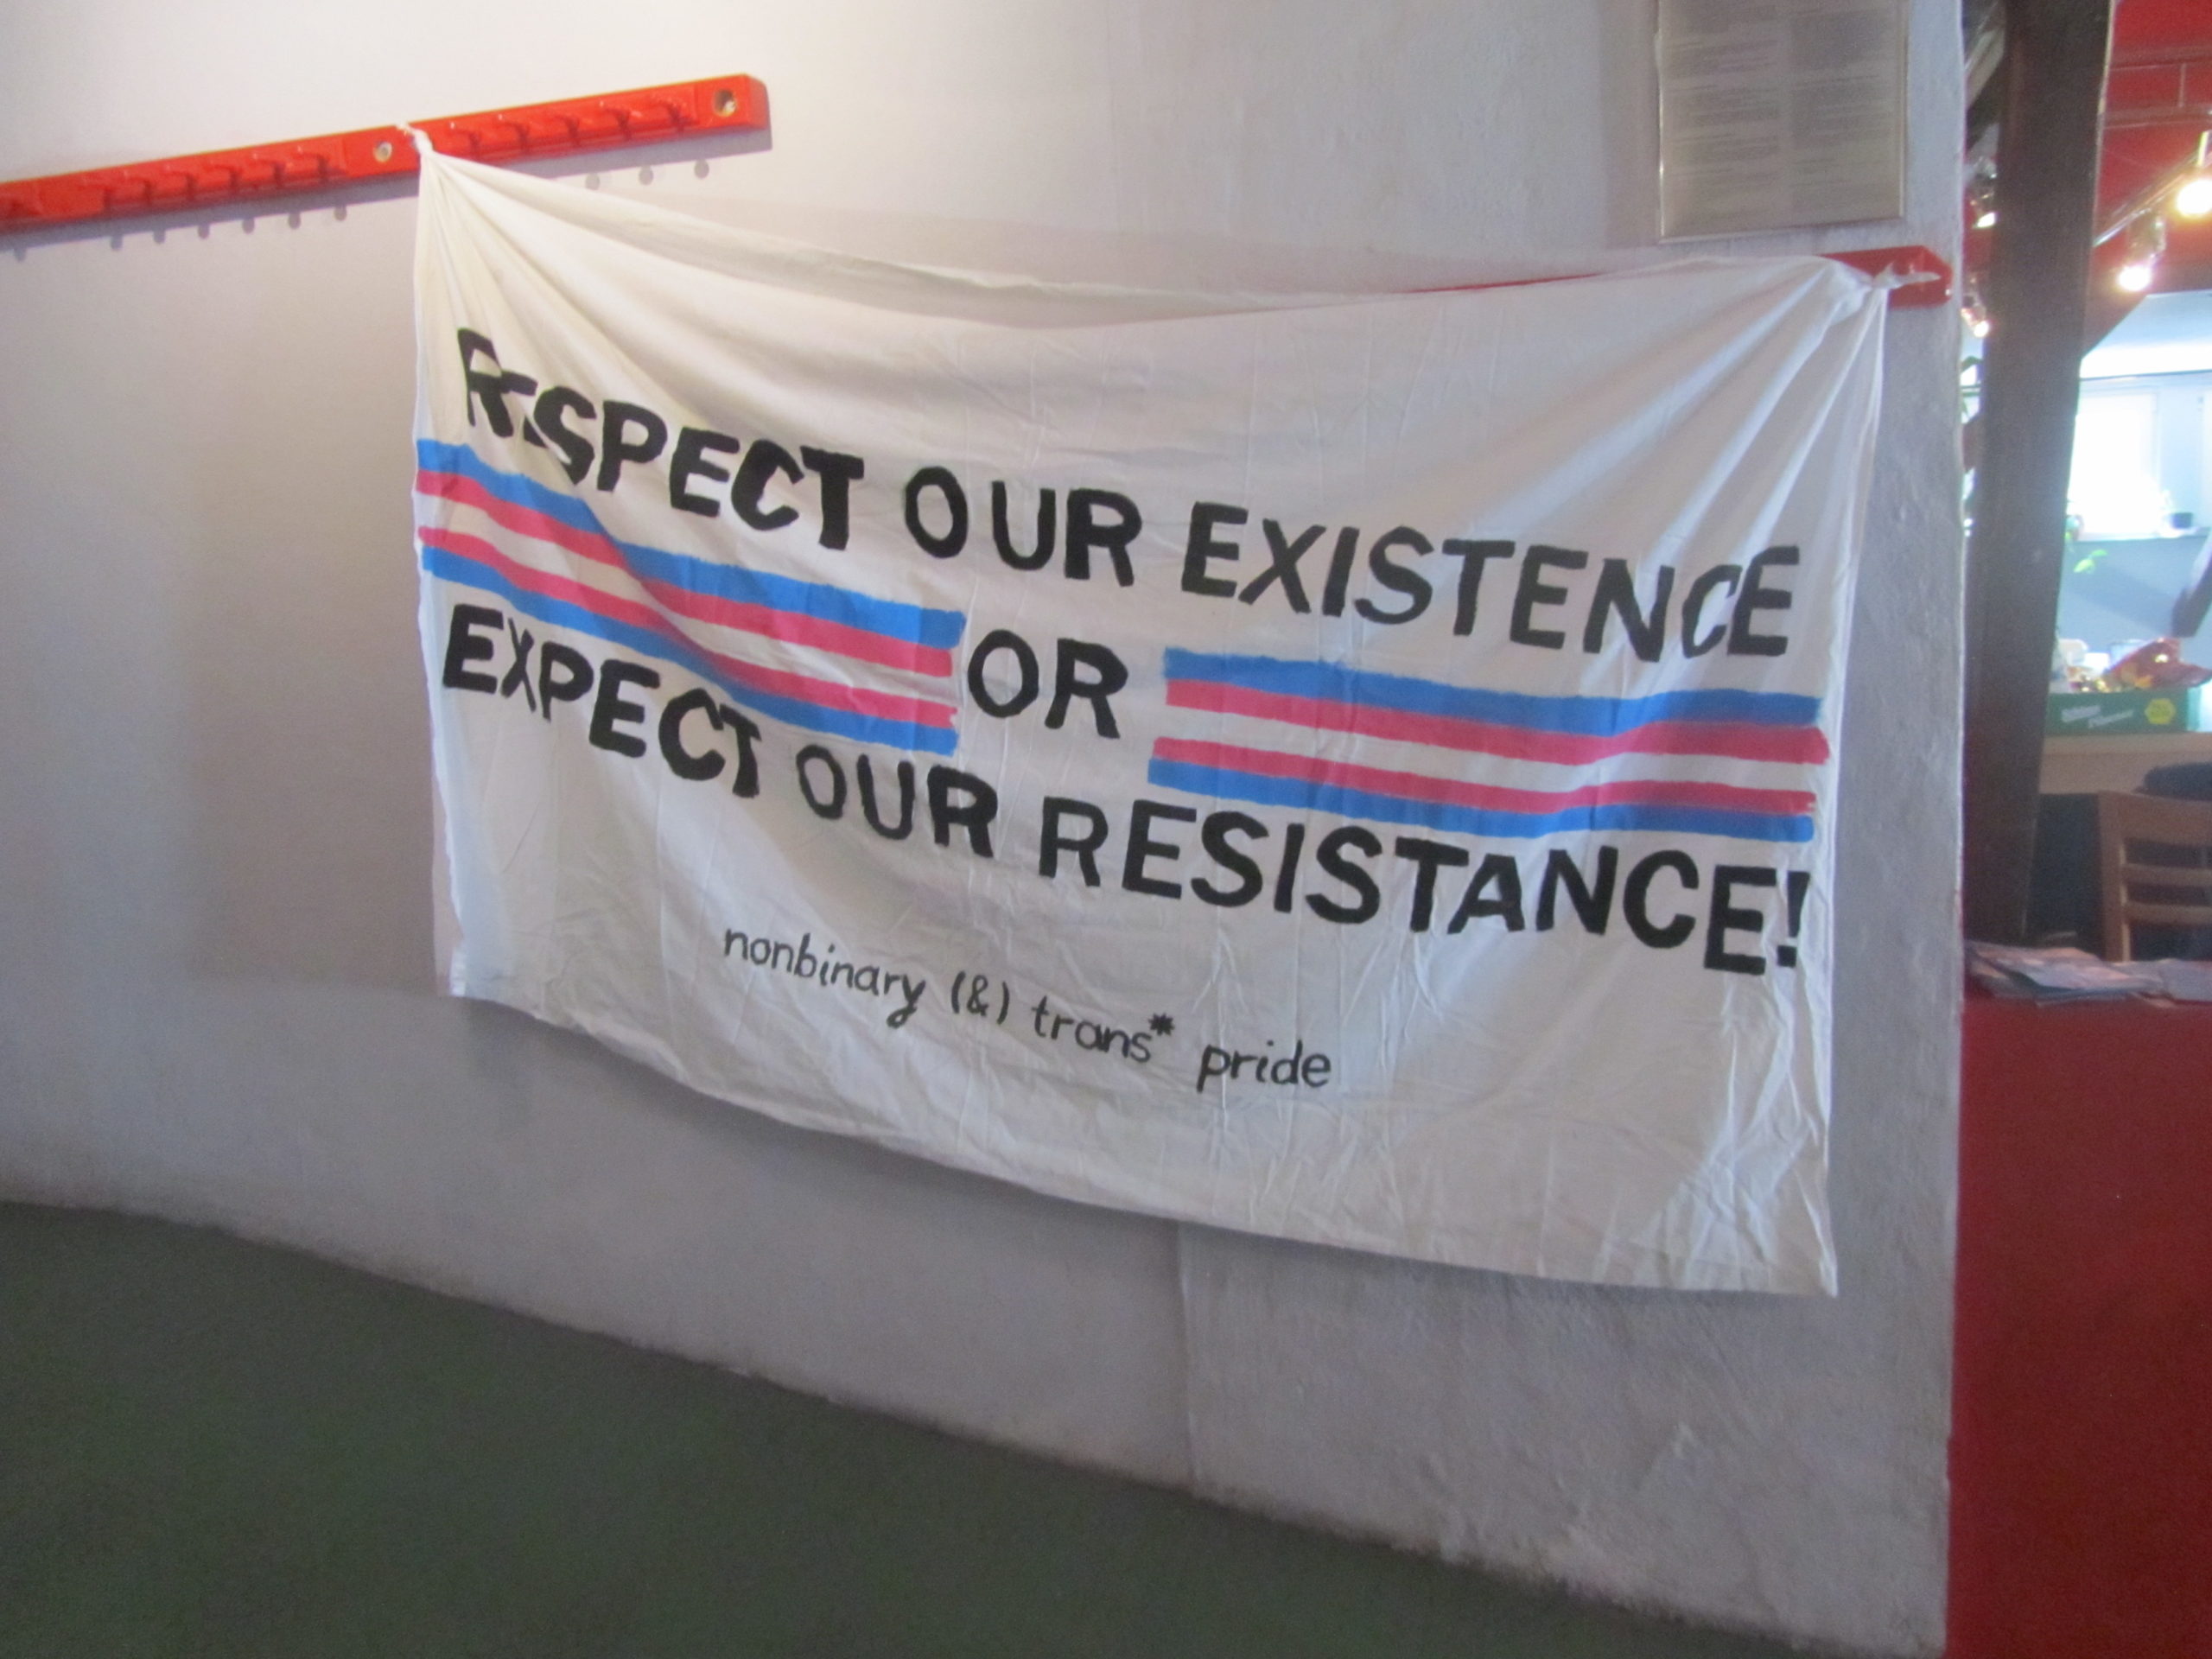 Banner auf der Trans*Tagung mit der Beschriftung "Respect our Existence or Expect Resistance!" - "nonbinary (&) trans* pride"